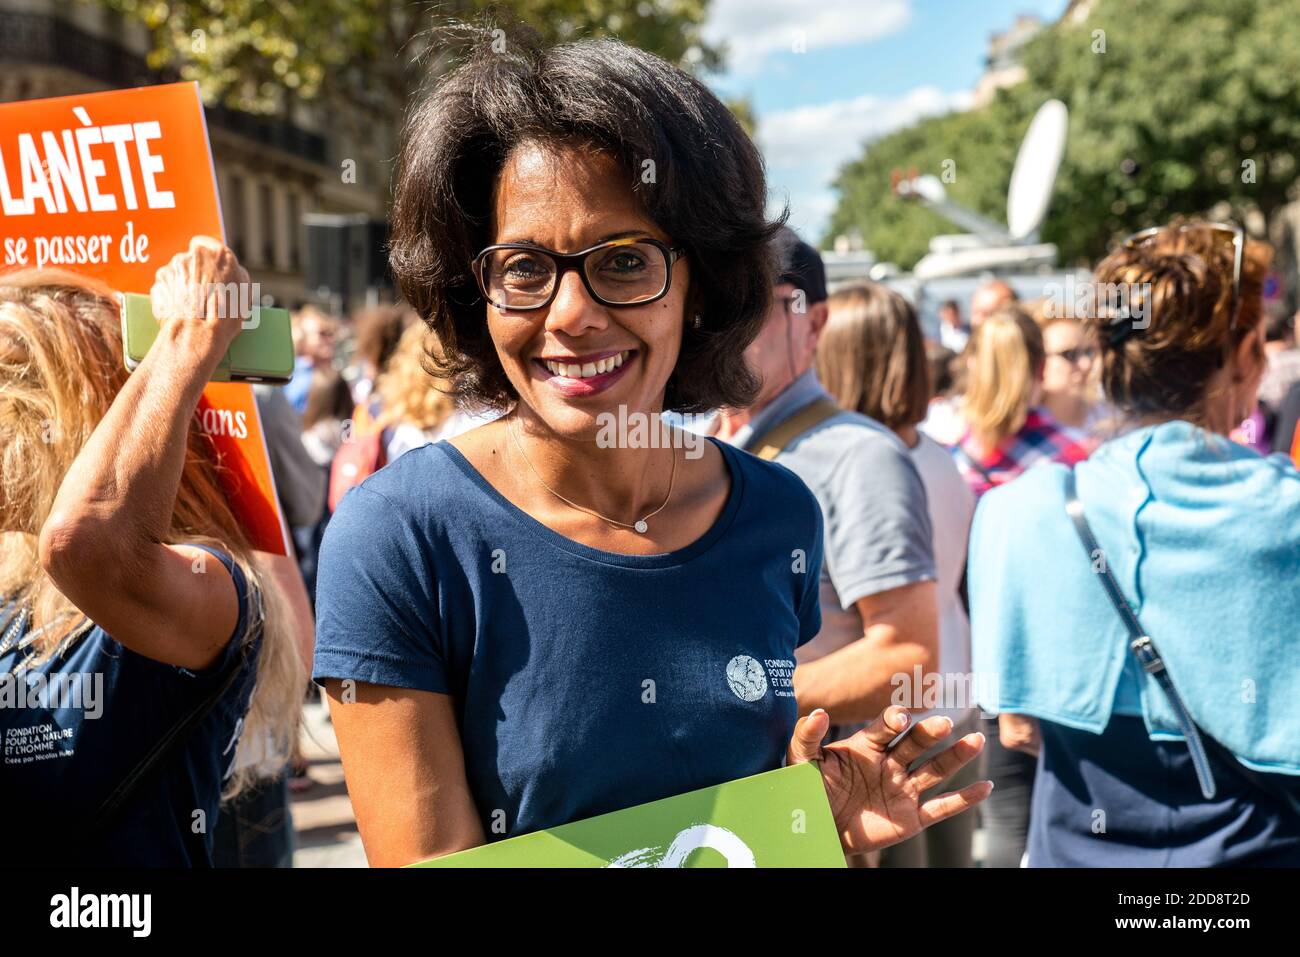 Audrey Pulvar takes part in the march for the climate, on September 8, 2018 in Paris, France. Several thousand of people gathered early in the afternoon in Paris, responding to a citizen call to make climate issues a priority of the government, following the resignation of of former Environment minister Nicolas Hulot. Photo by Denis Prezat/Avenir Pictures/ABACAPRESS.COM Stock Photo